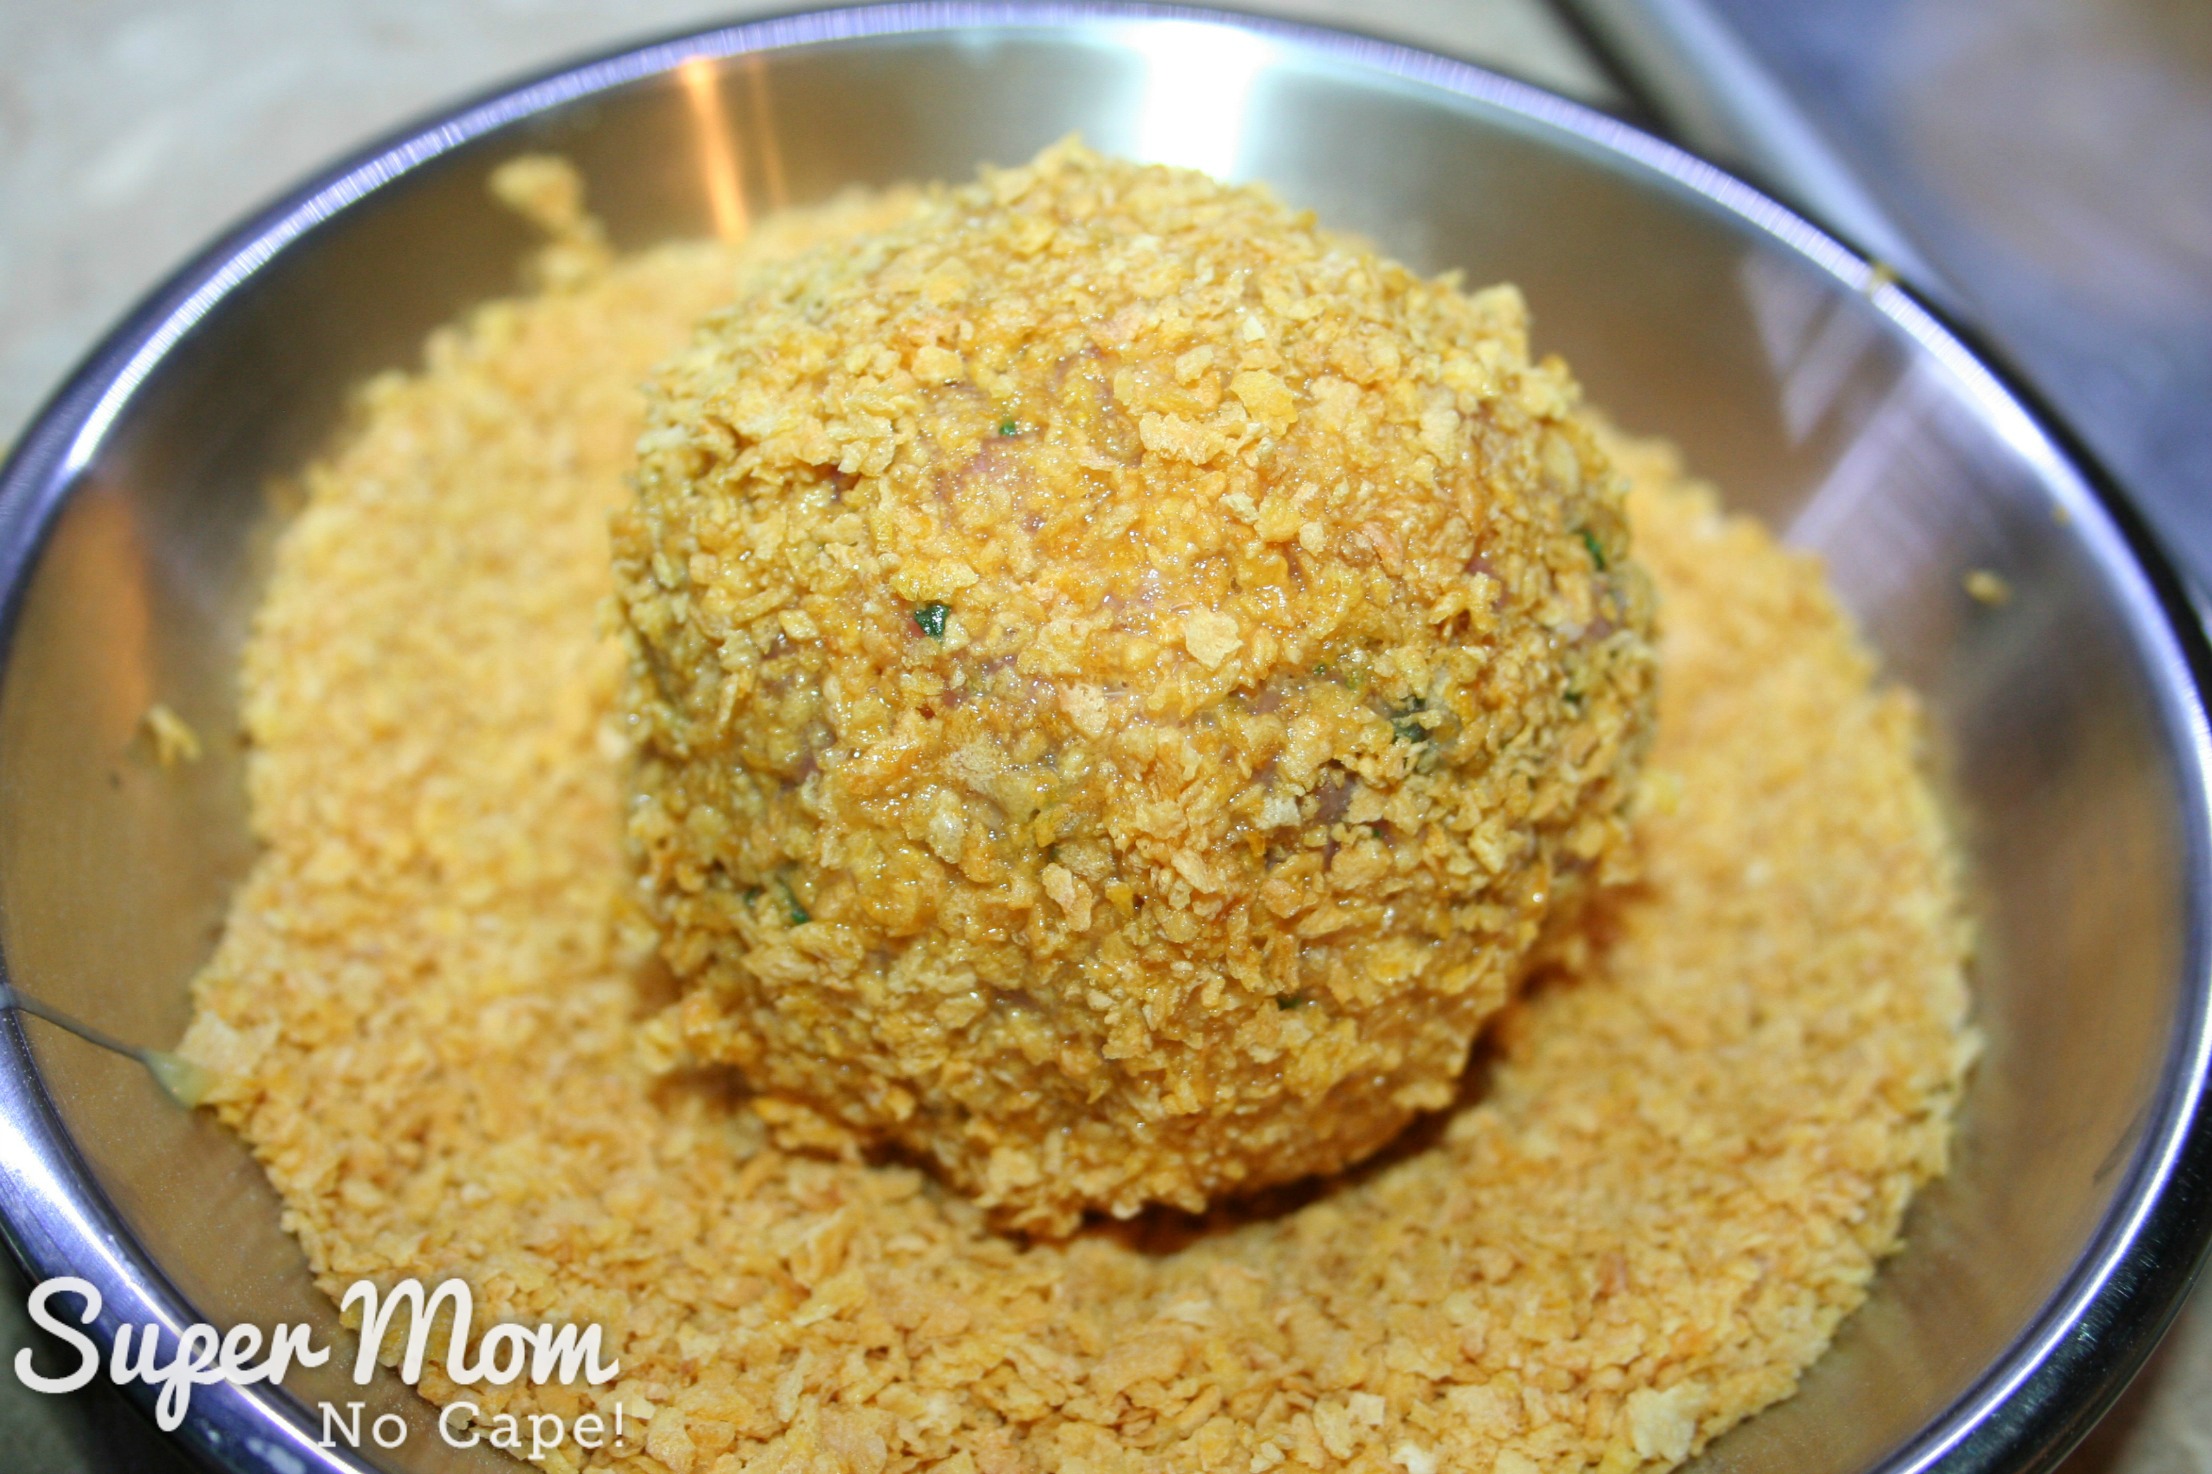 Gluten Free Baked Scotch Eggs - roll scotch eggs in crush cornflakes for a second time